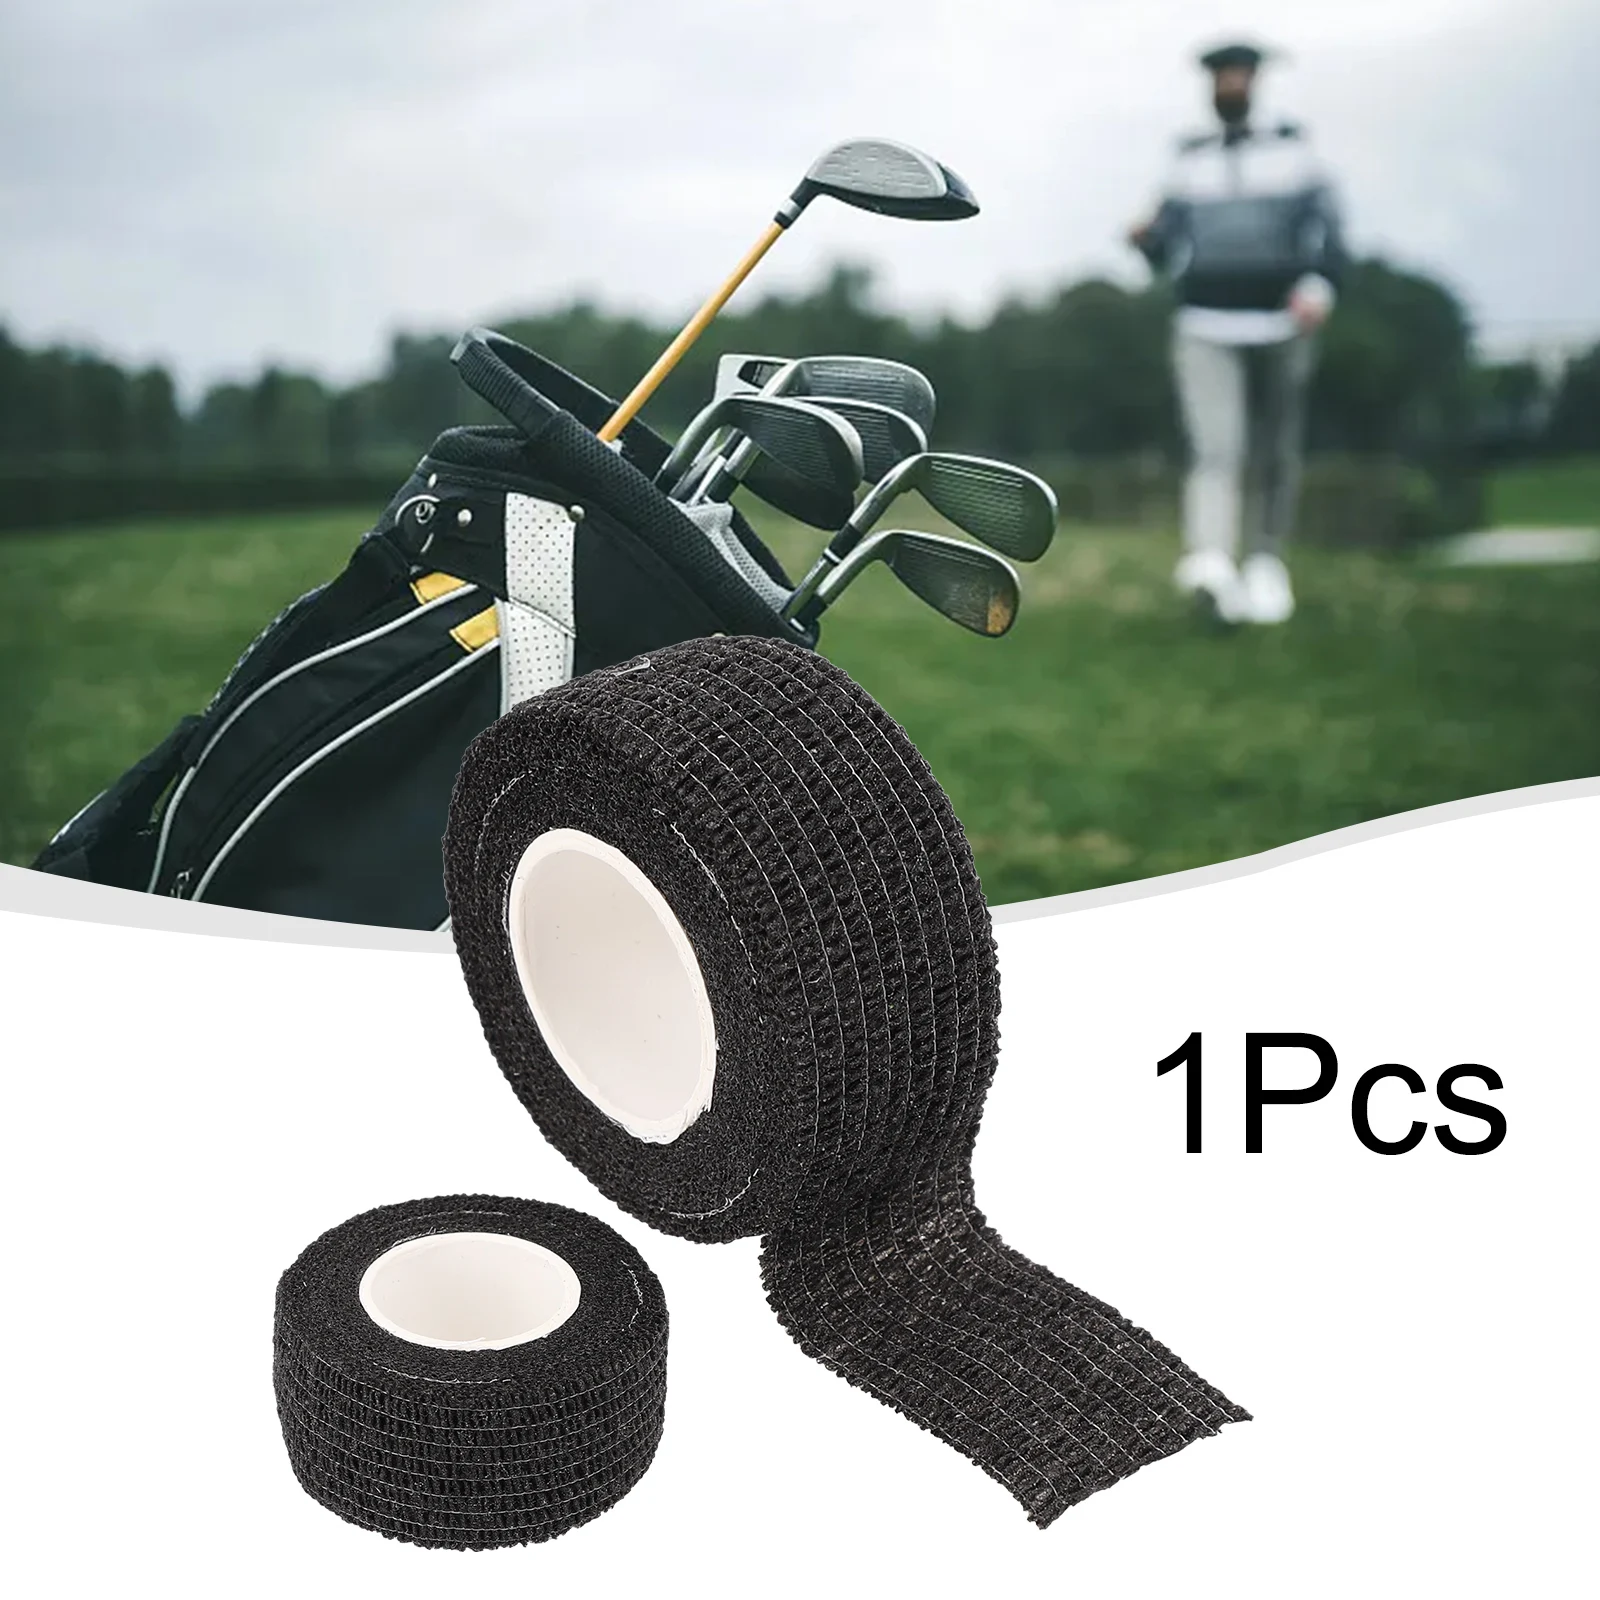 

High quality Elastic bandage Prevent injuries Anti Blister Tape Anti-Skid Durable Finger Adhesive Golf Club Grip Protector